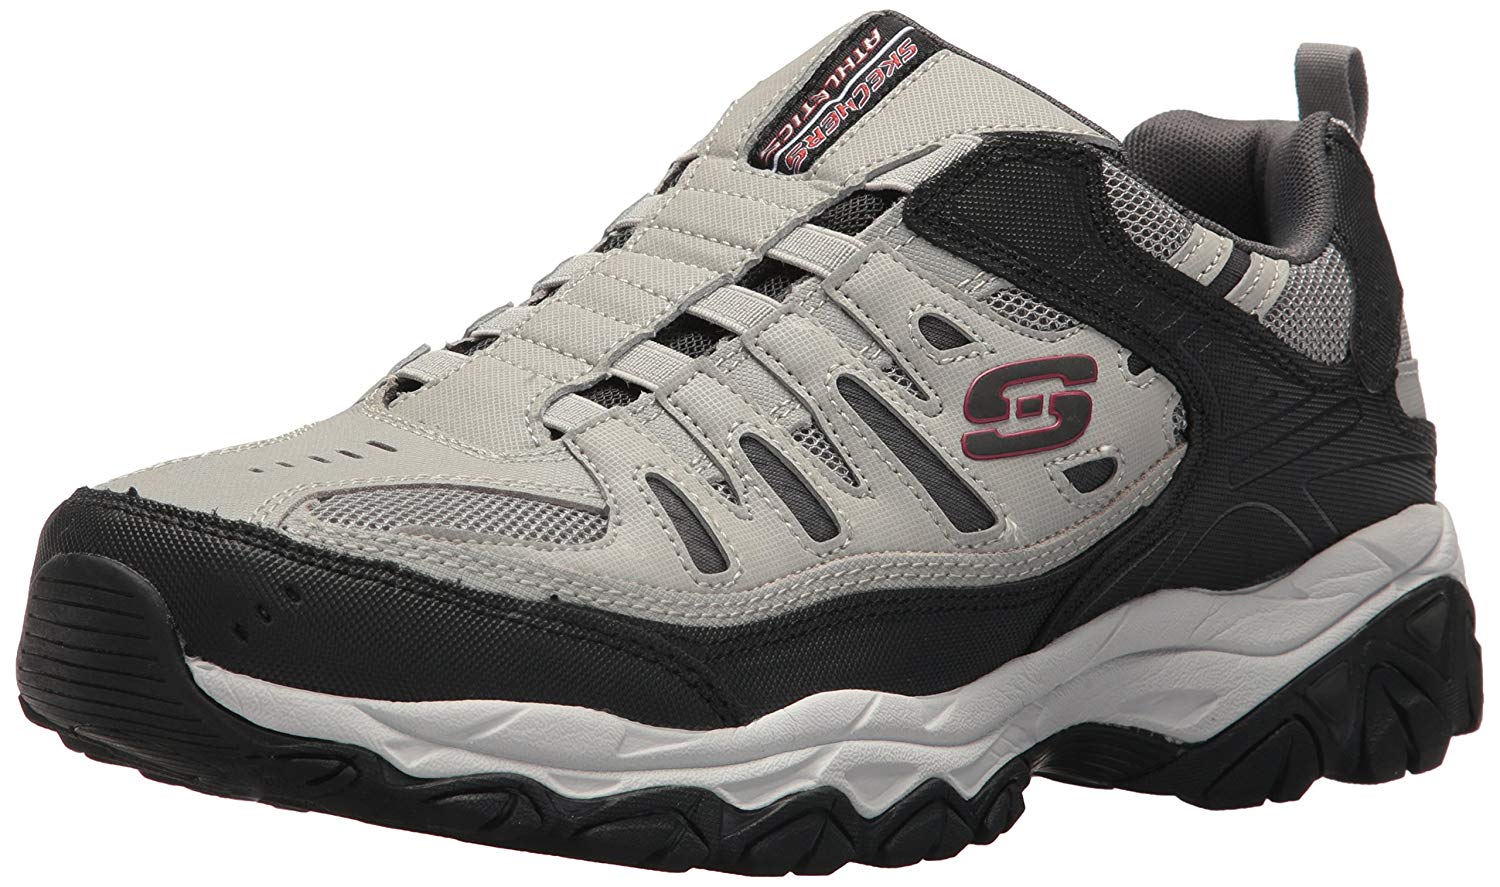 Skechers Mens After Burn Low Top Pull On Fashion Sneakers, Gray/Black ...